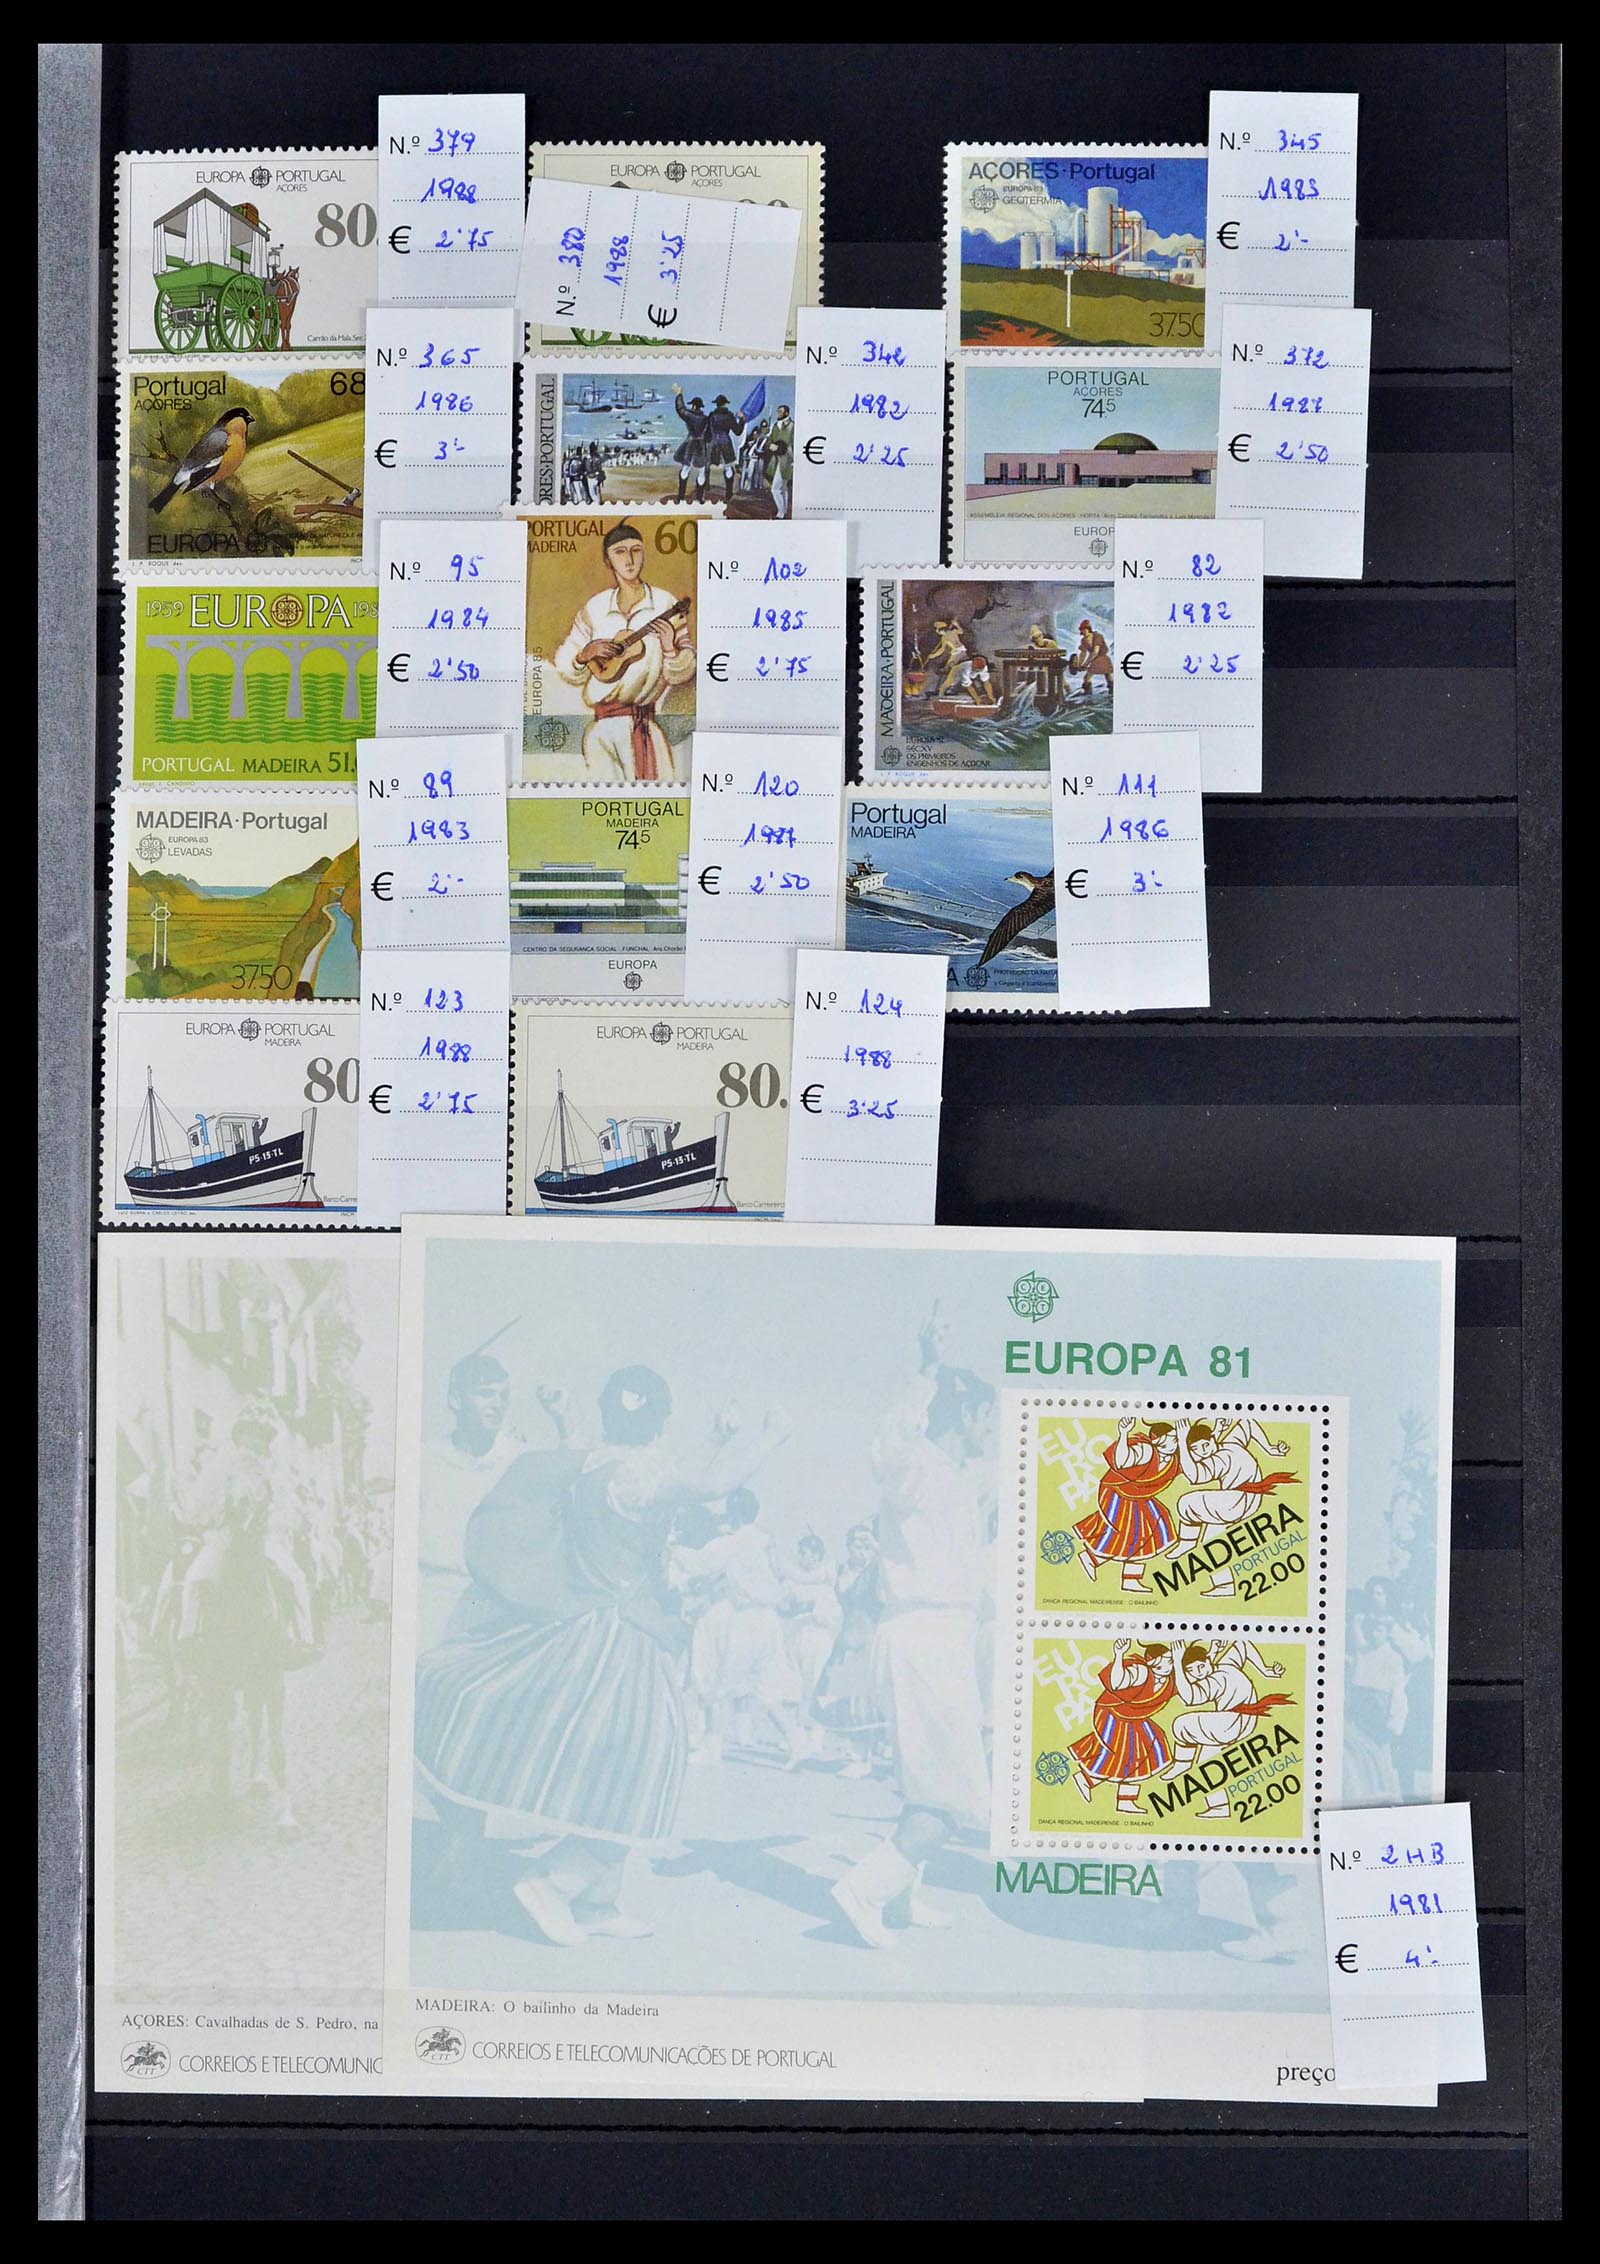 39236 0014 - Stamp collection 39236 European countries 40s-60s.